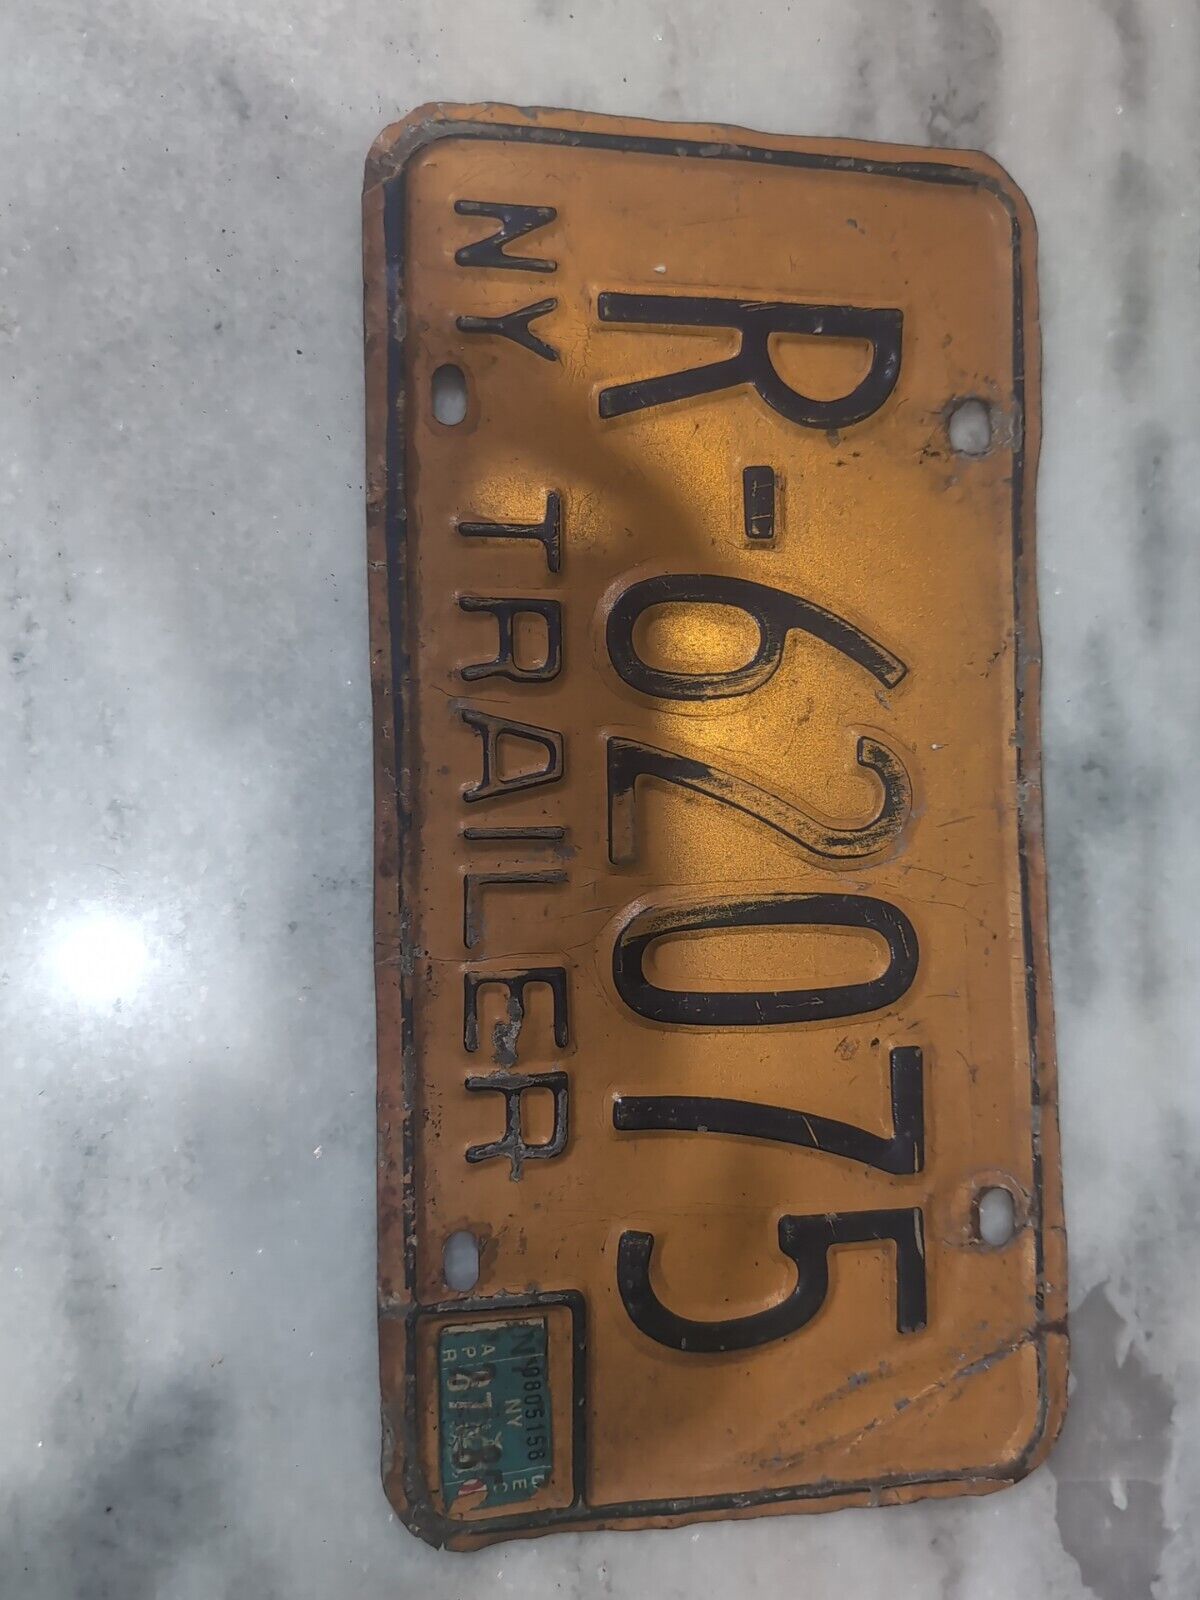 Vintage 1970’s New York Trailer License Plate.  NY Tag #R-62075